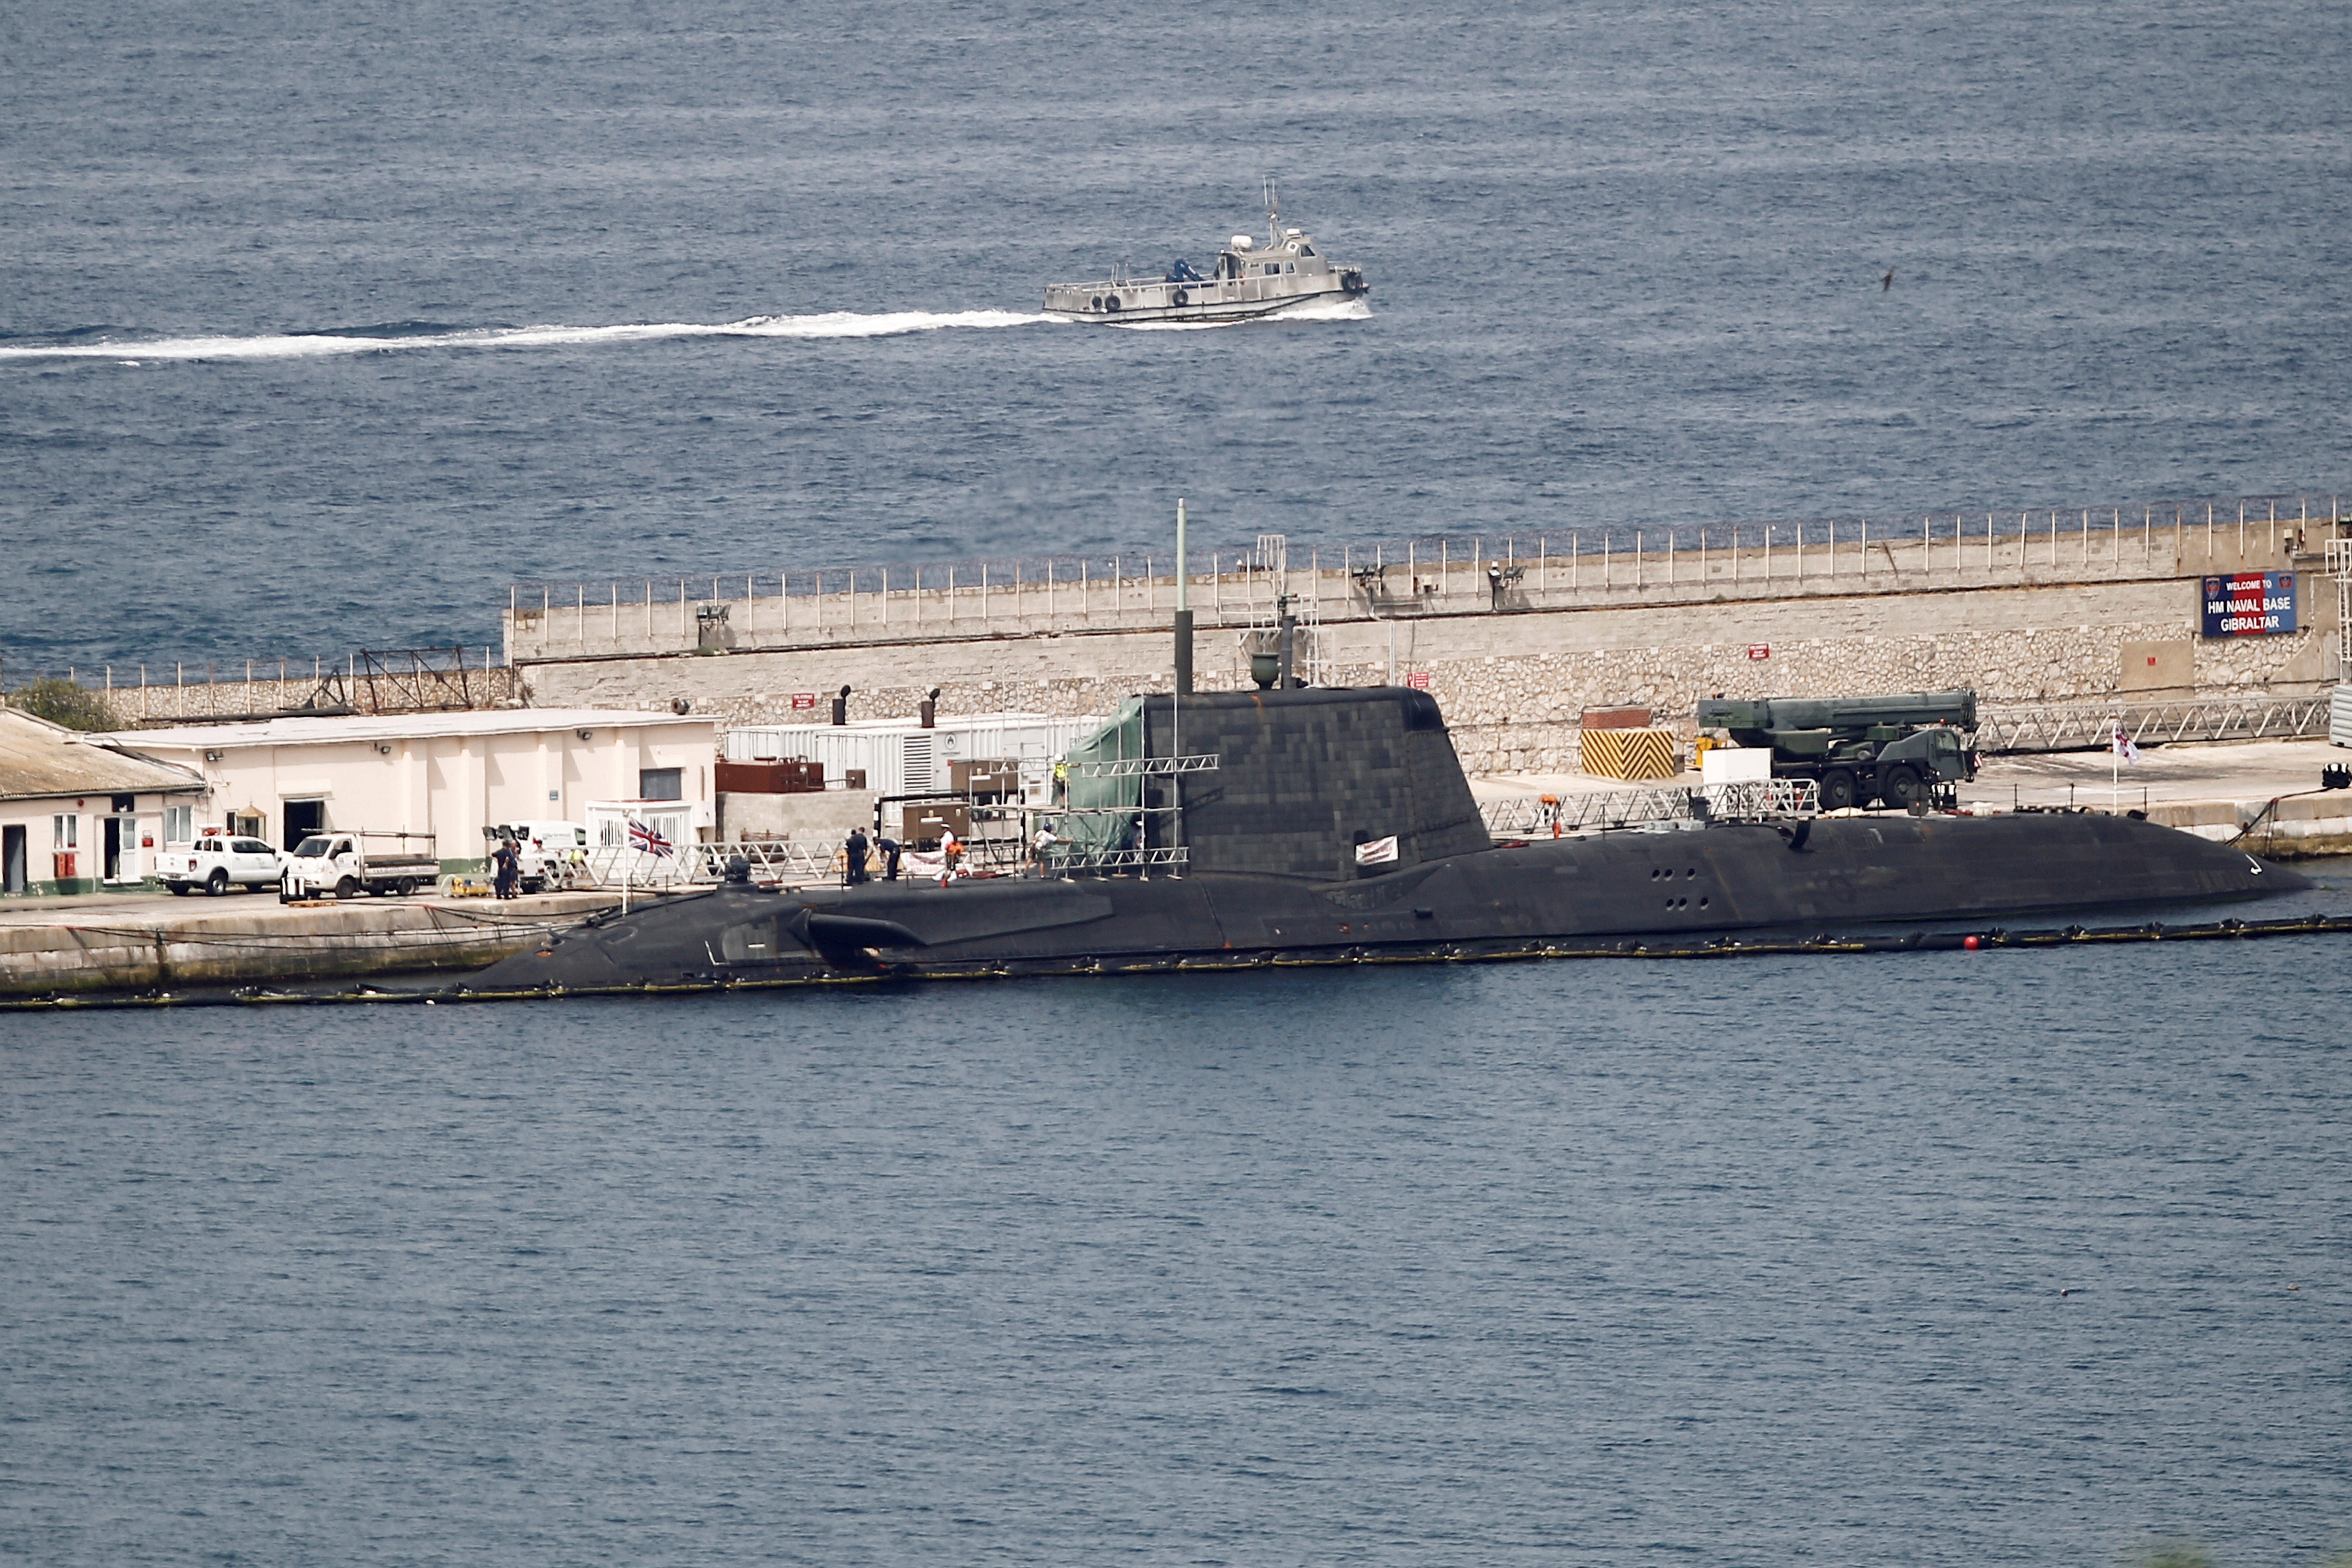 A British nuclear Astute-class submarine HMS Ambush is seen docked in a port while it is repaired in the British overseas territory of Gibraltar